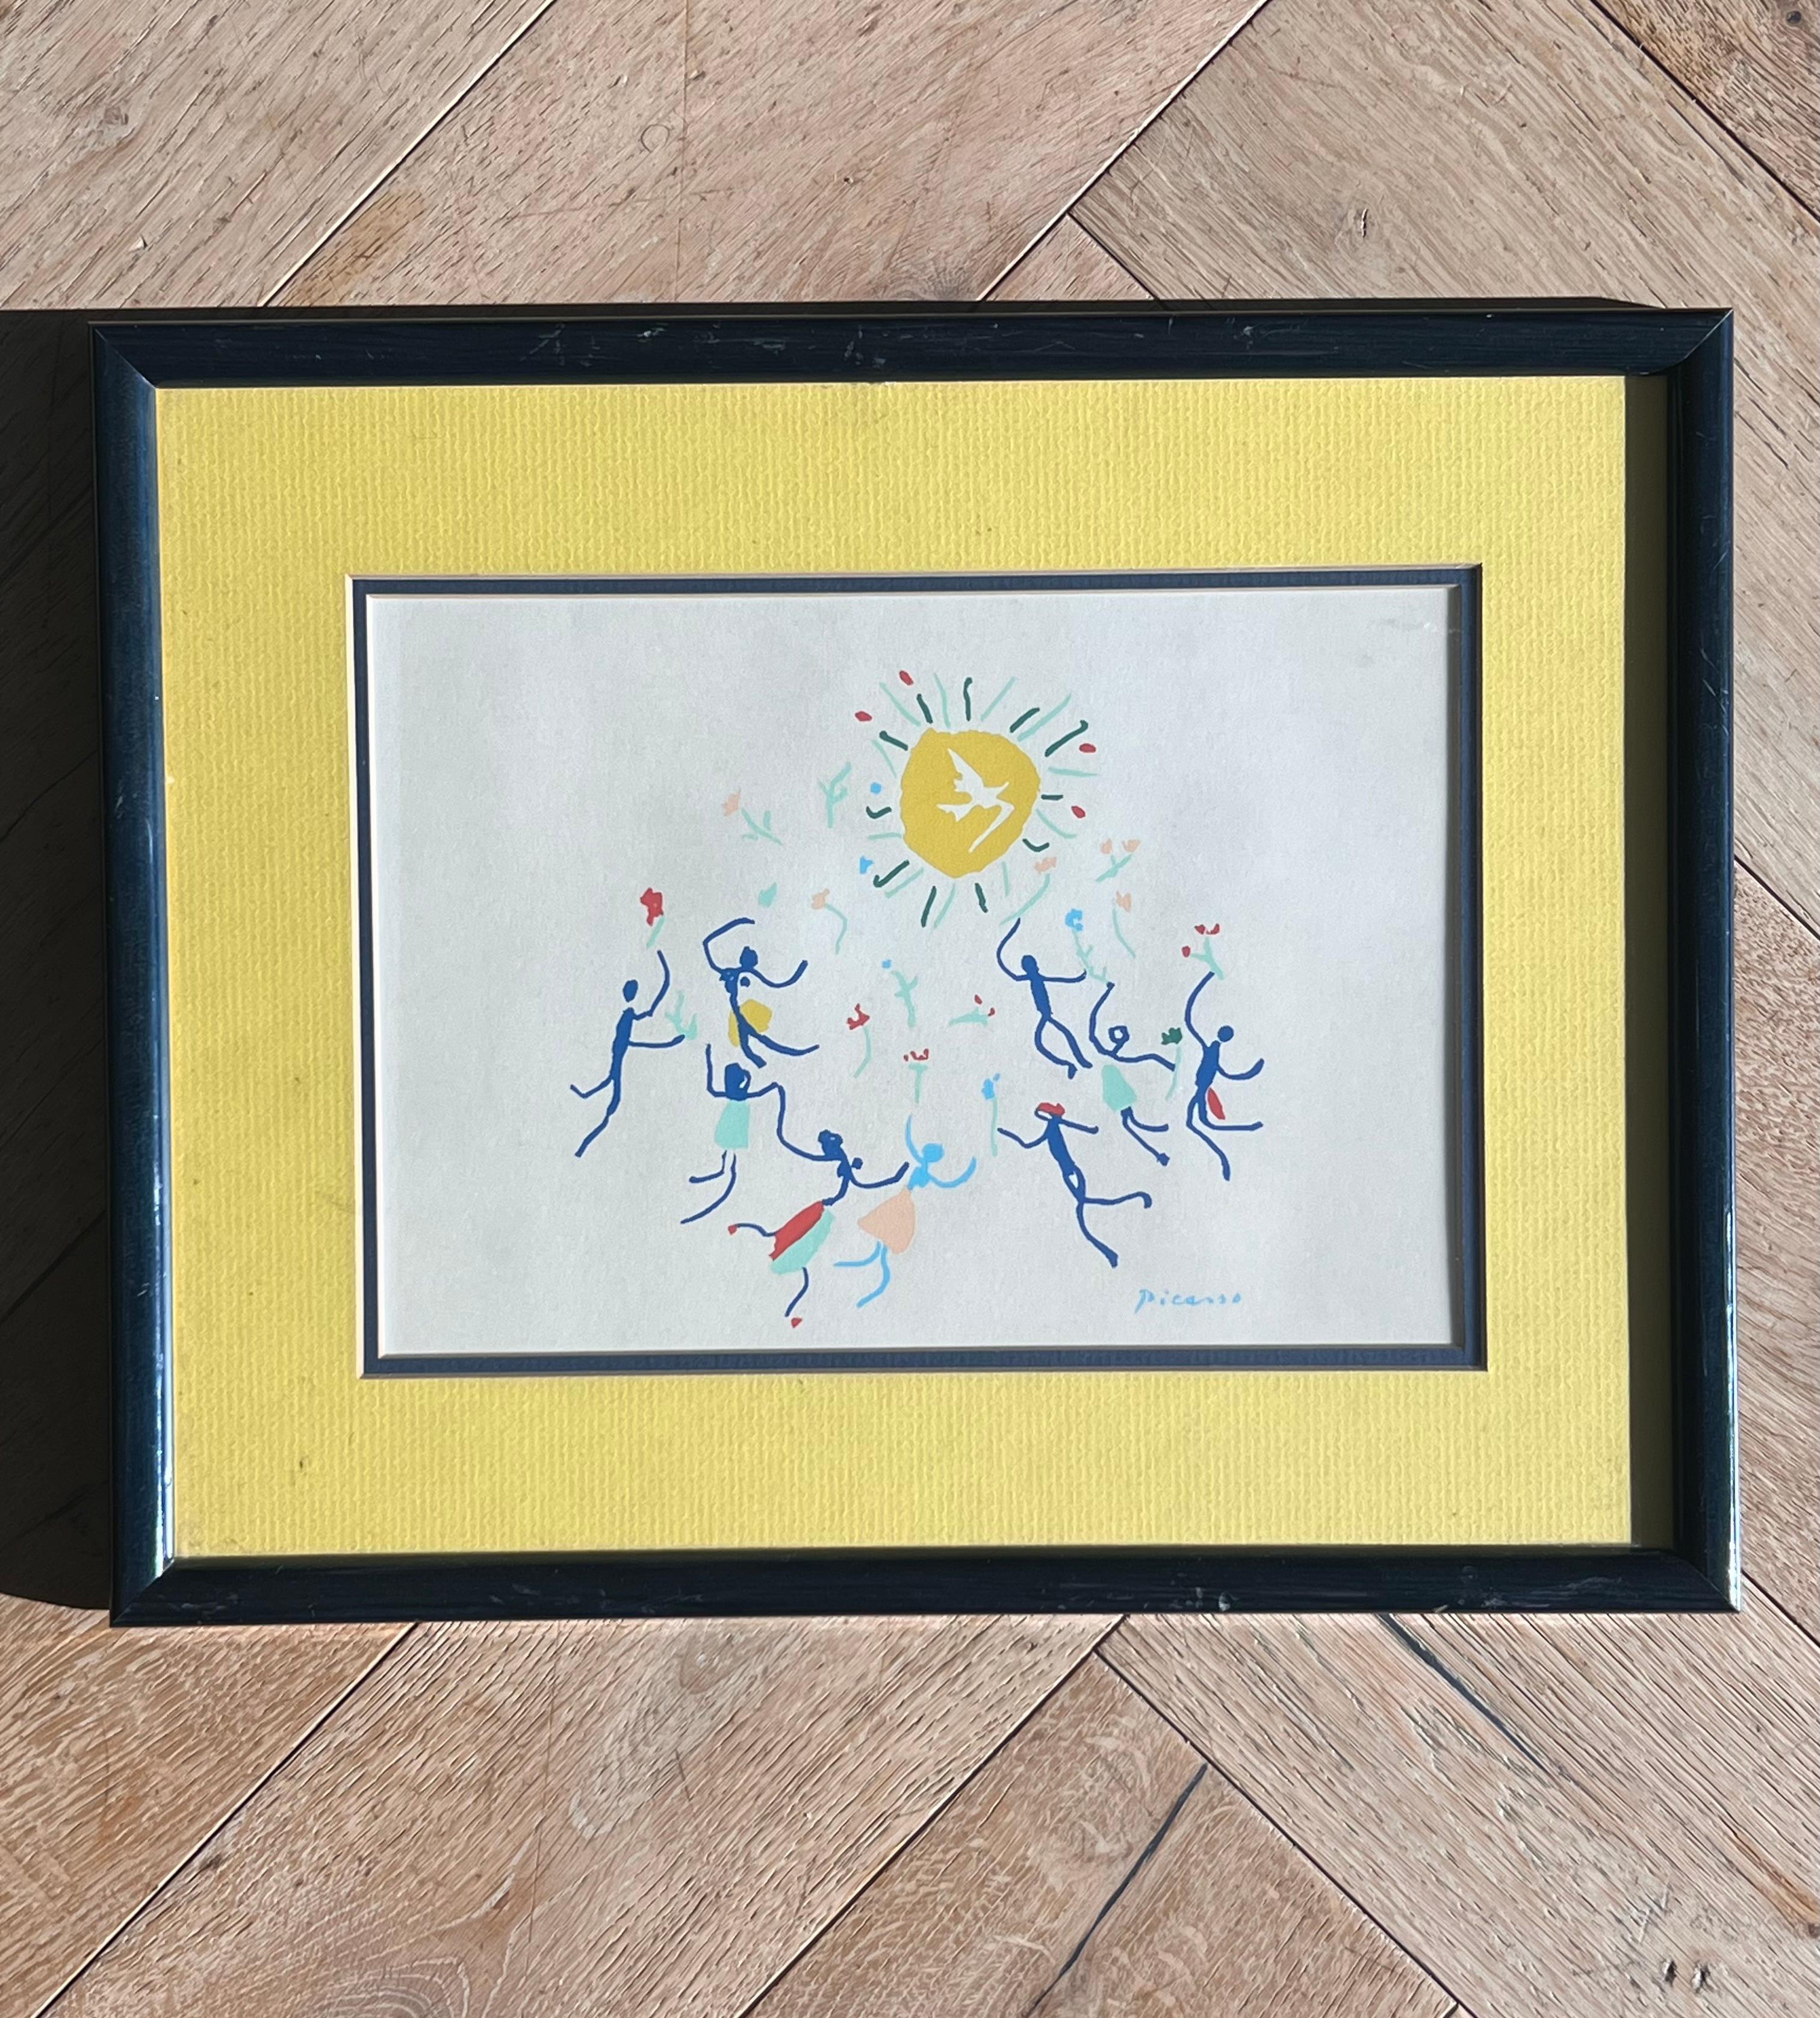 Mid century framed Picasso print “Homage to the Sun”, 20th century For Sale 4